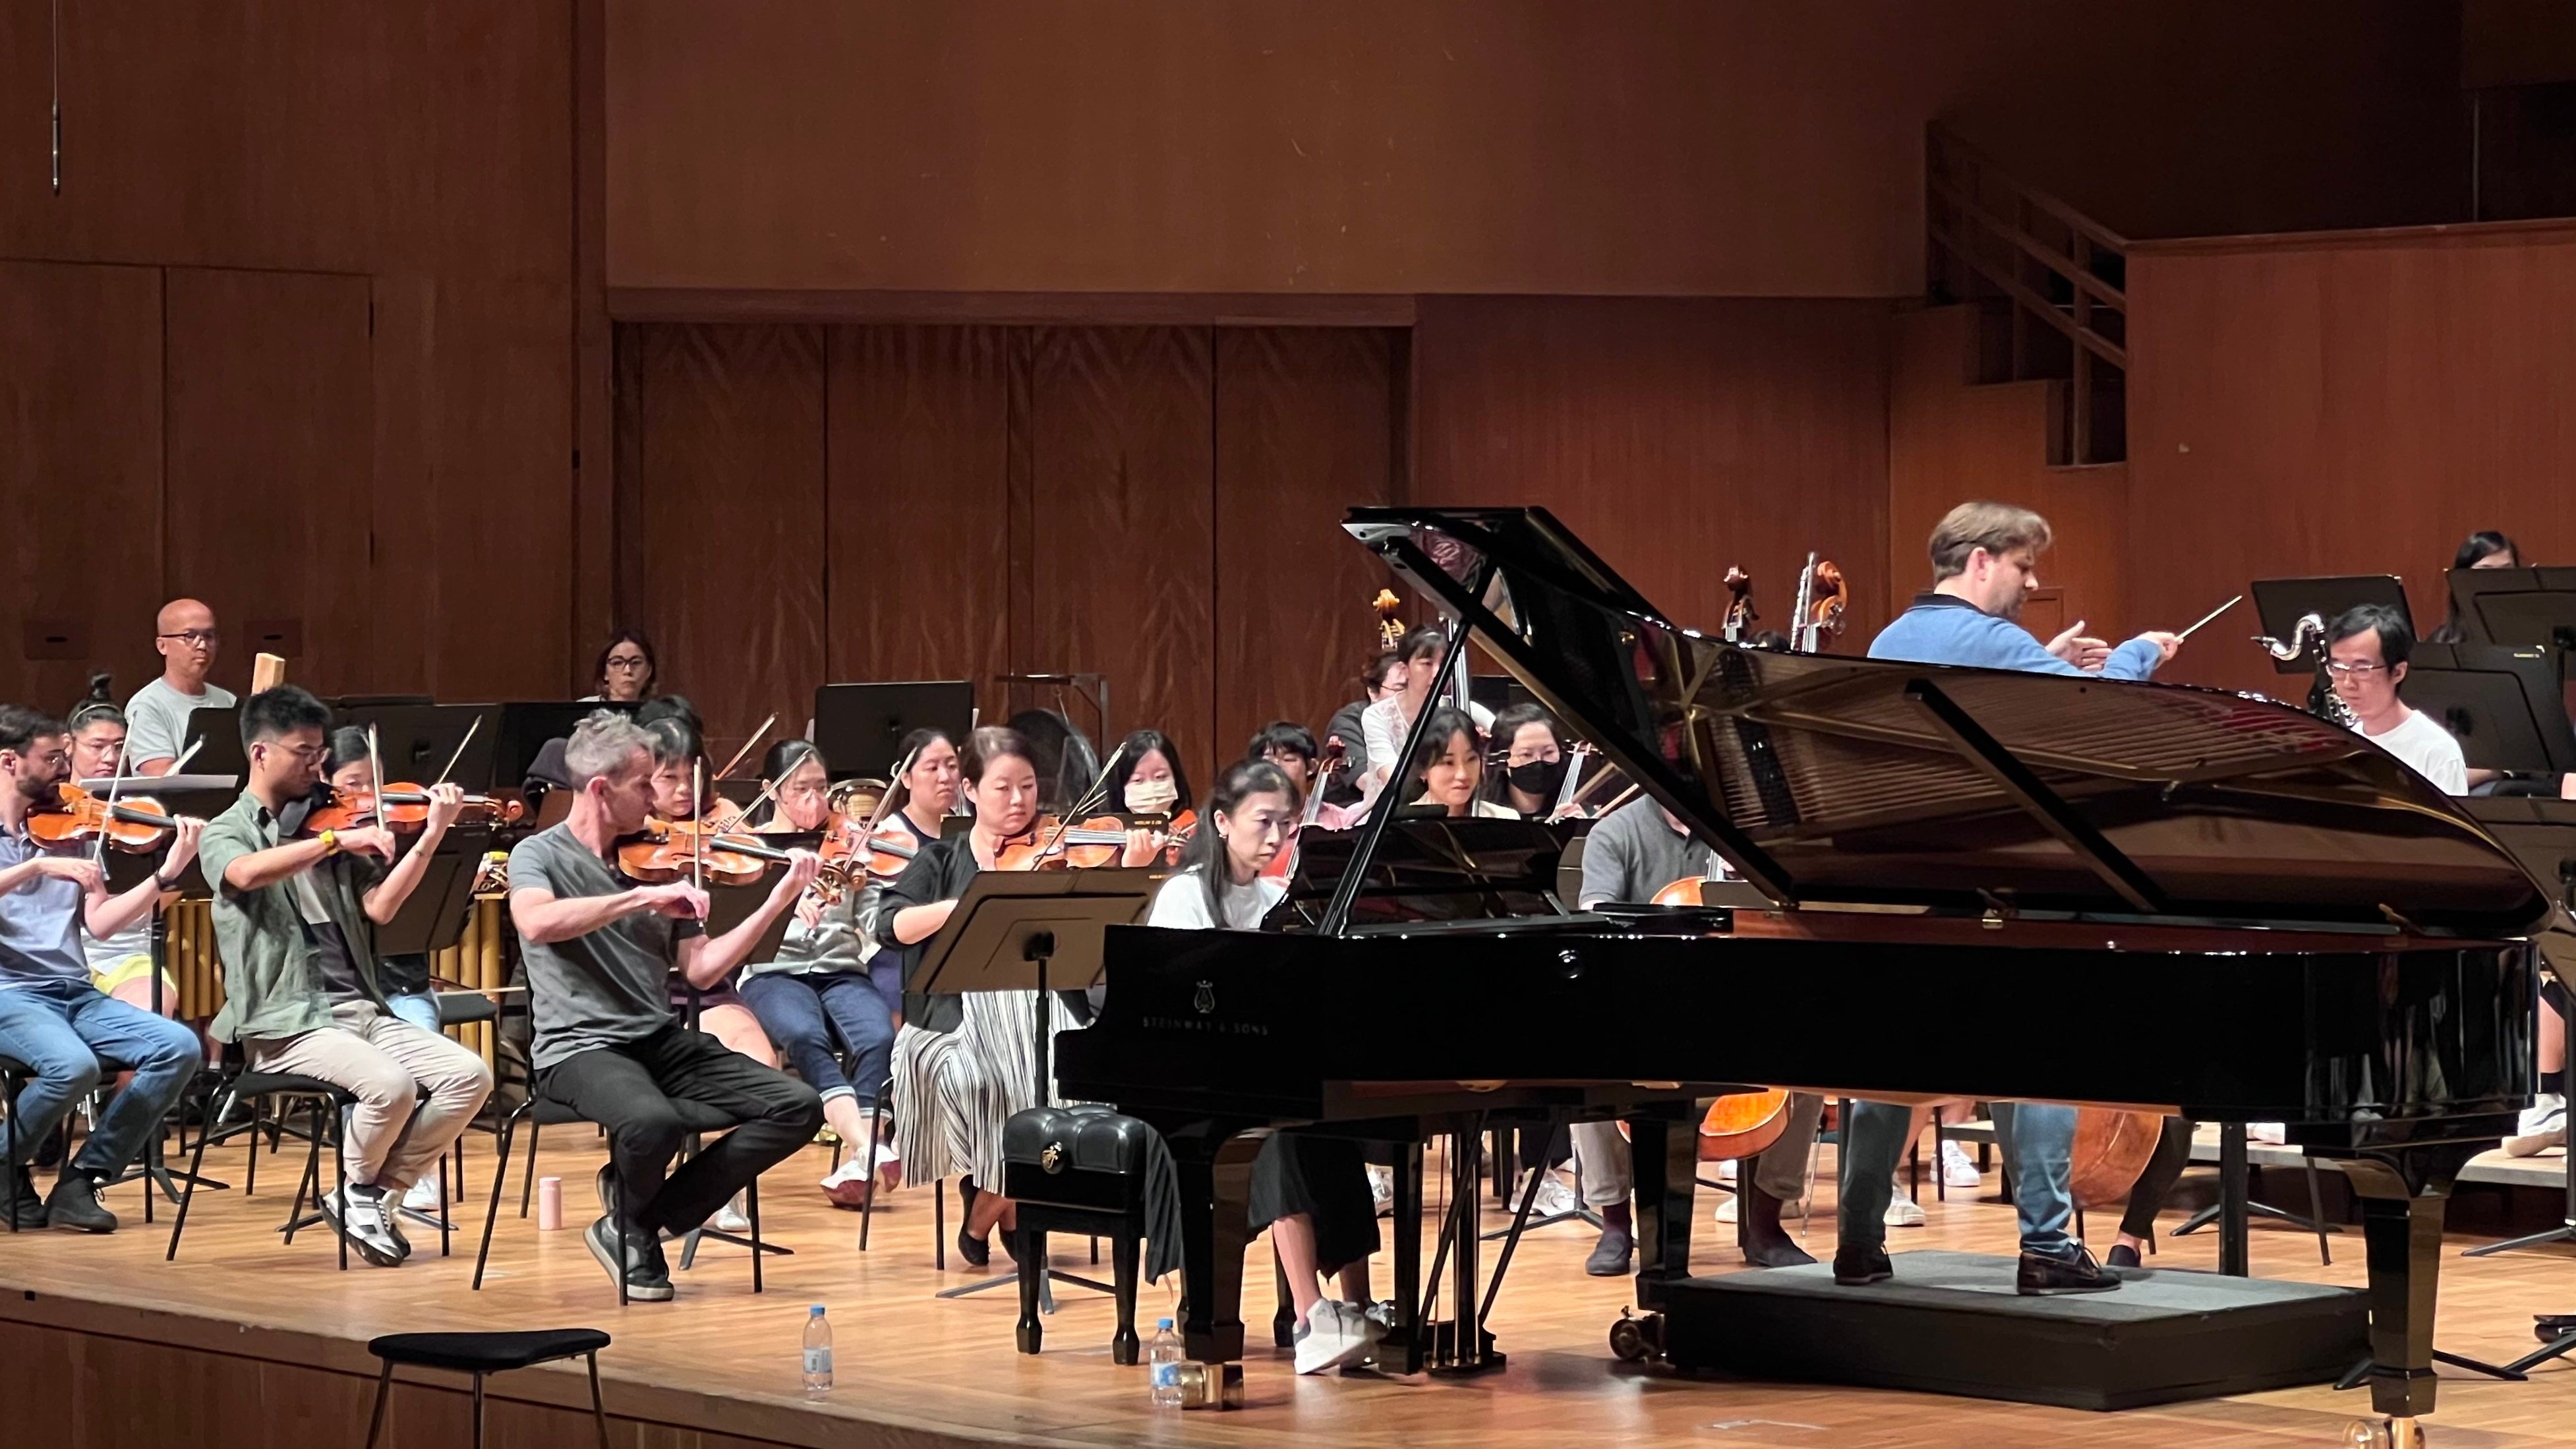 The Hong Kong Sinfonietta and soloist Colleen Lee rehearse Charles Kwong’s “Piano Concerto” on the eve of its rescheduled world premiere. The concert was cancelled soon afterwards with Typhoon Saola bearing down on the city. Photo: Hong Kong Sinfonietta